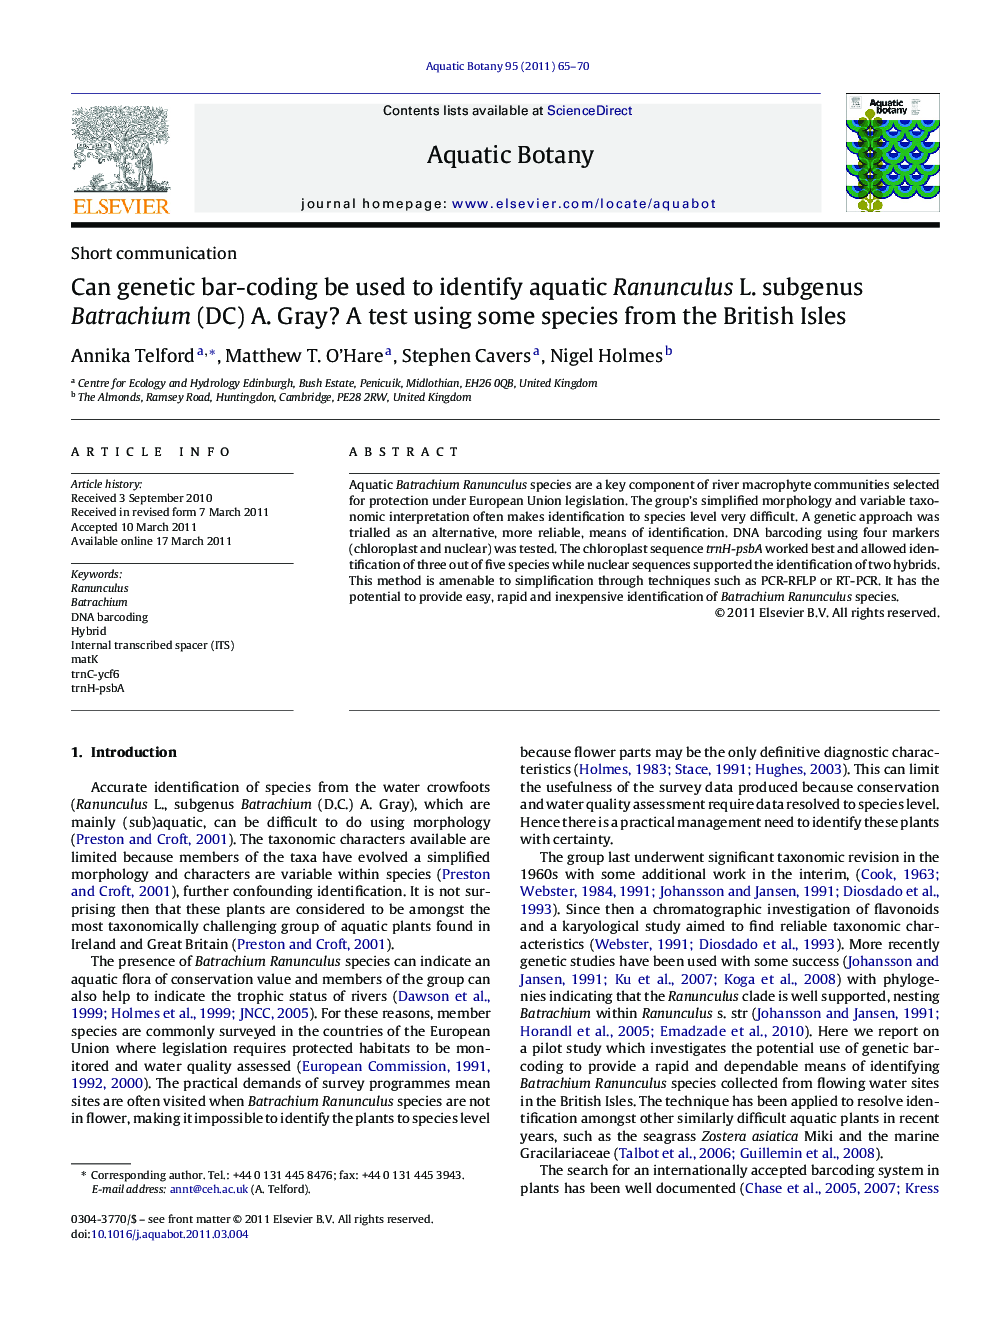 Can genetic bar-coding be used to identify aquatic Ranunculus L. subgenus Batrachium (DC) A. Gray? A test using some species from the British Isles